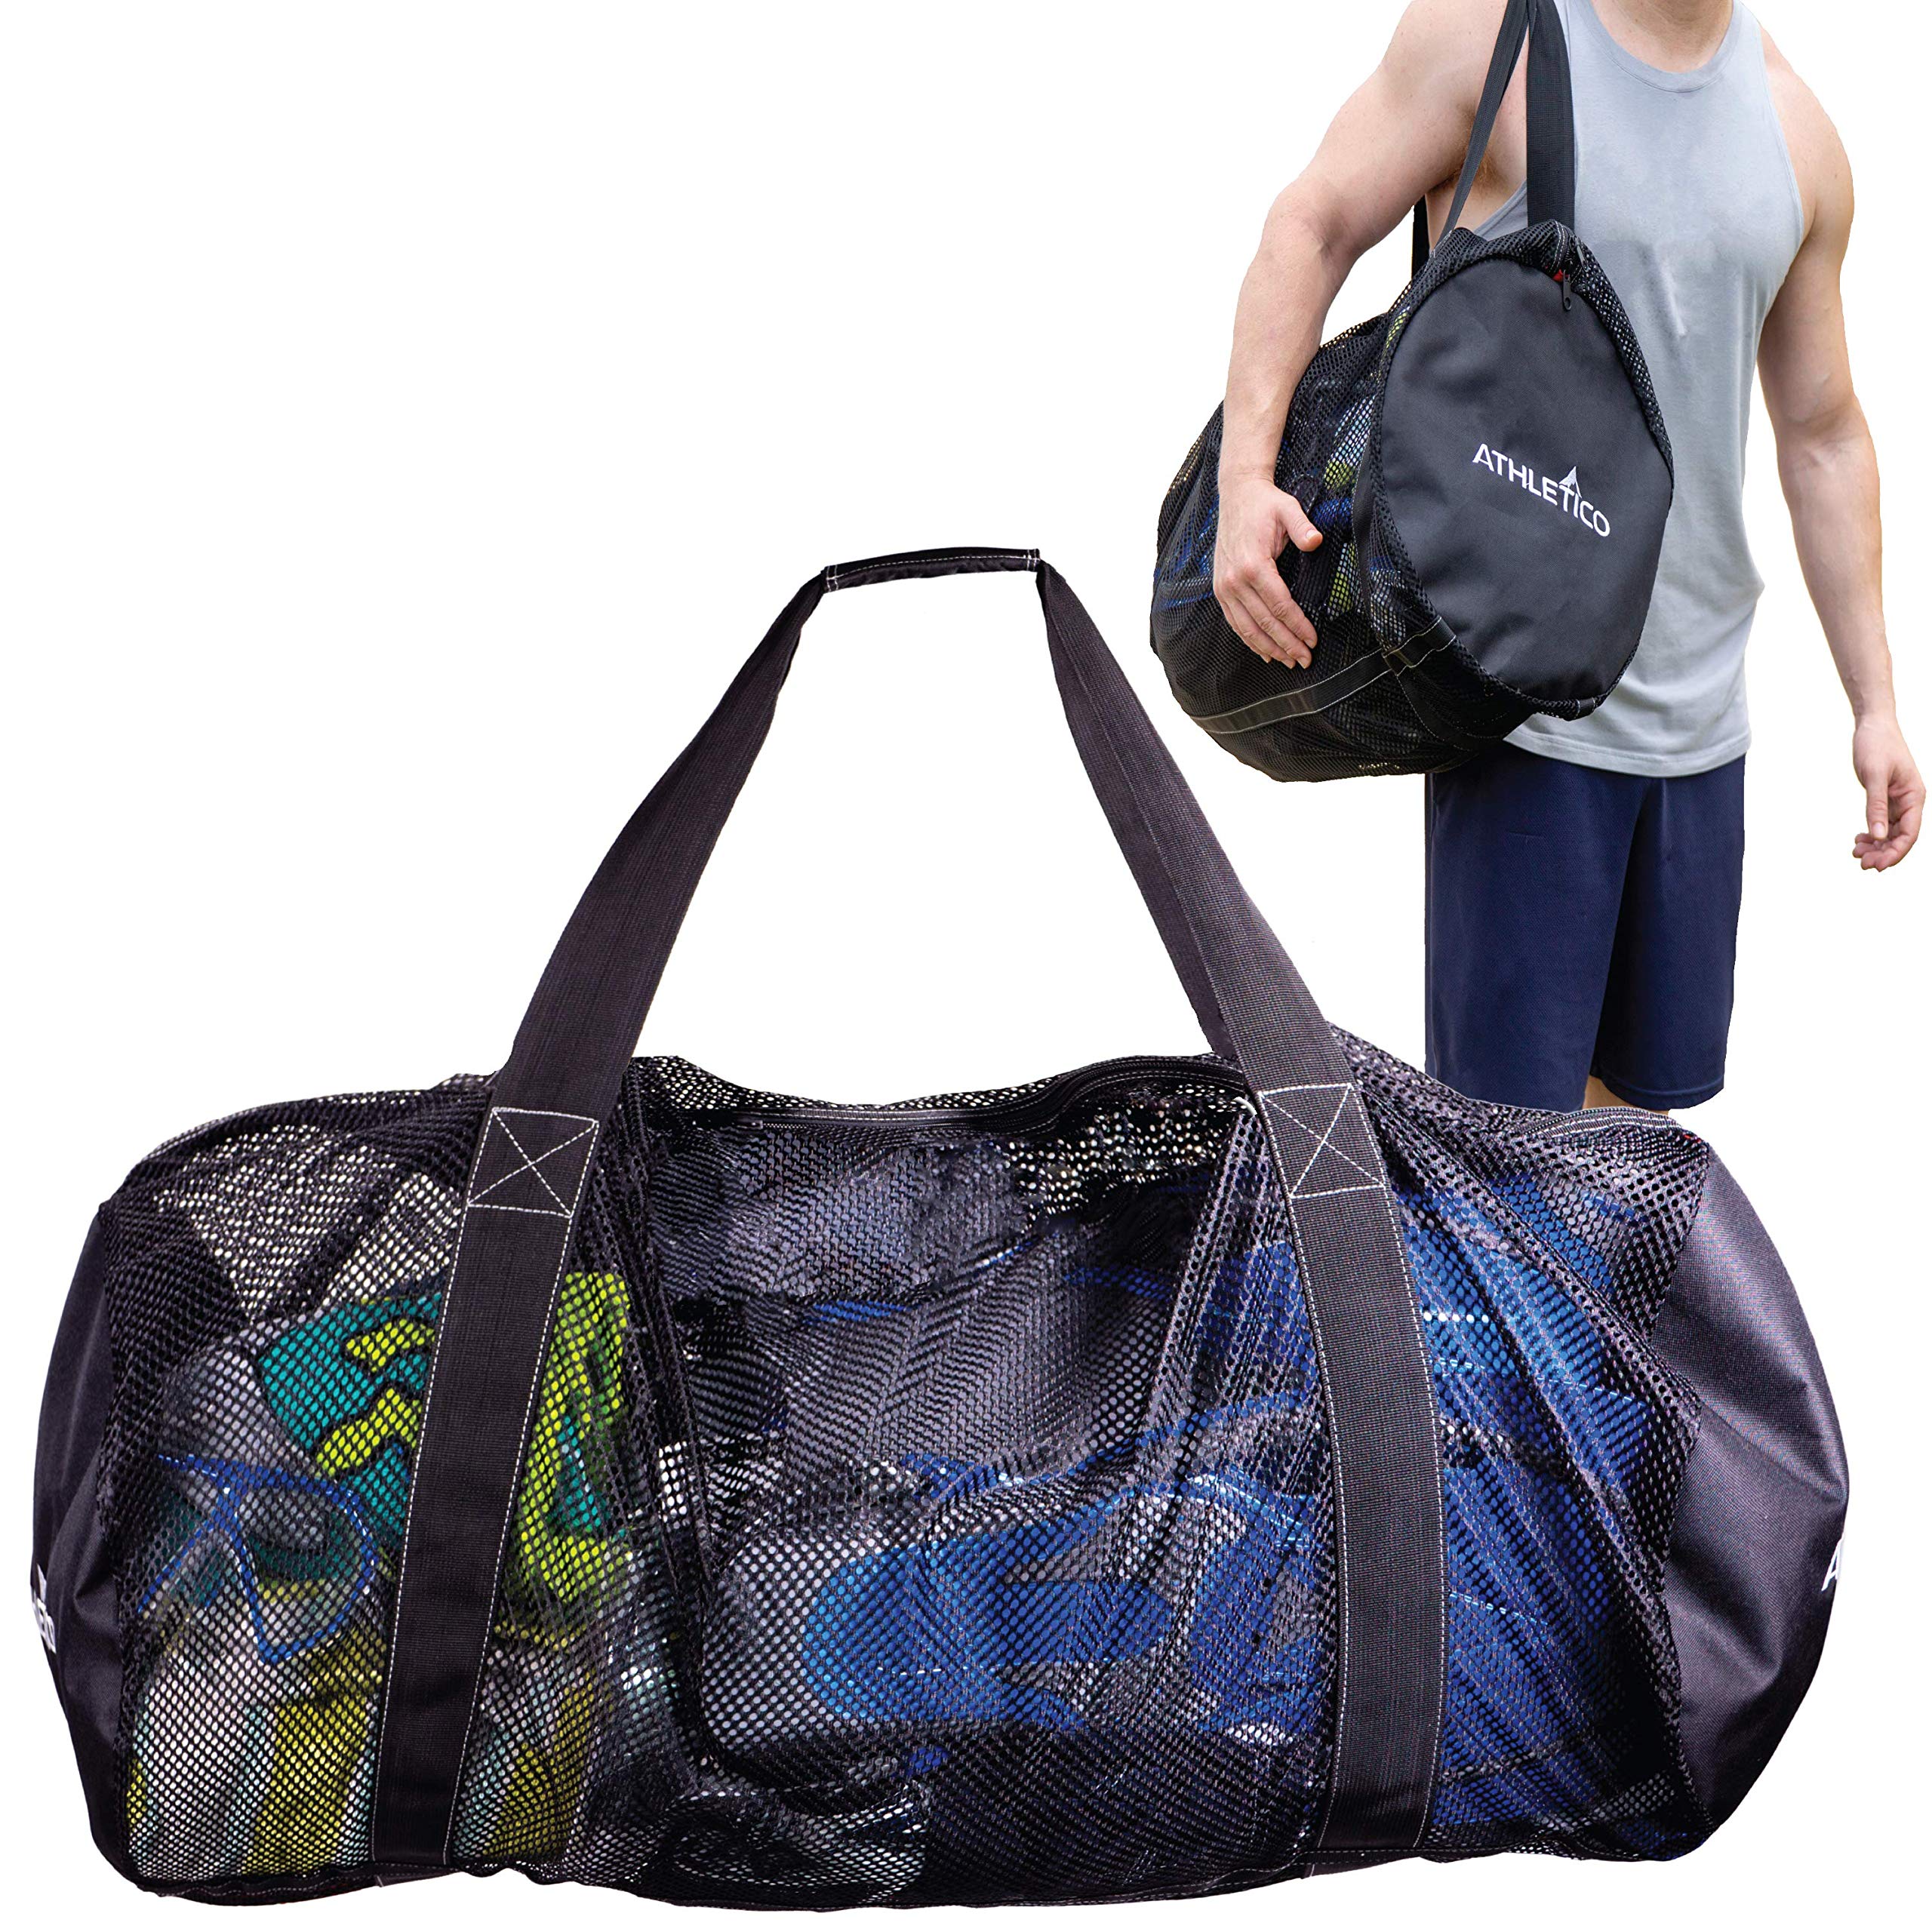 Athletico Mesh Dive Duffel Bag for Scuba or Snorkeling - XL Mesh Travel Duffle for Scuba Diving and Snorkeling Gear & Equipment - Dry Bag Holds Mask, Fins, Snorkel, and More  - Acceptable